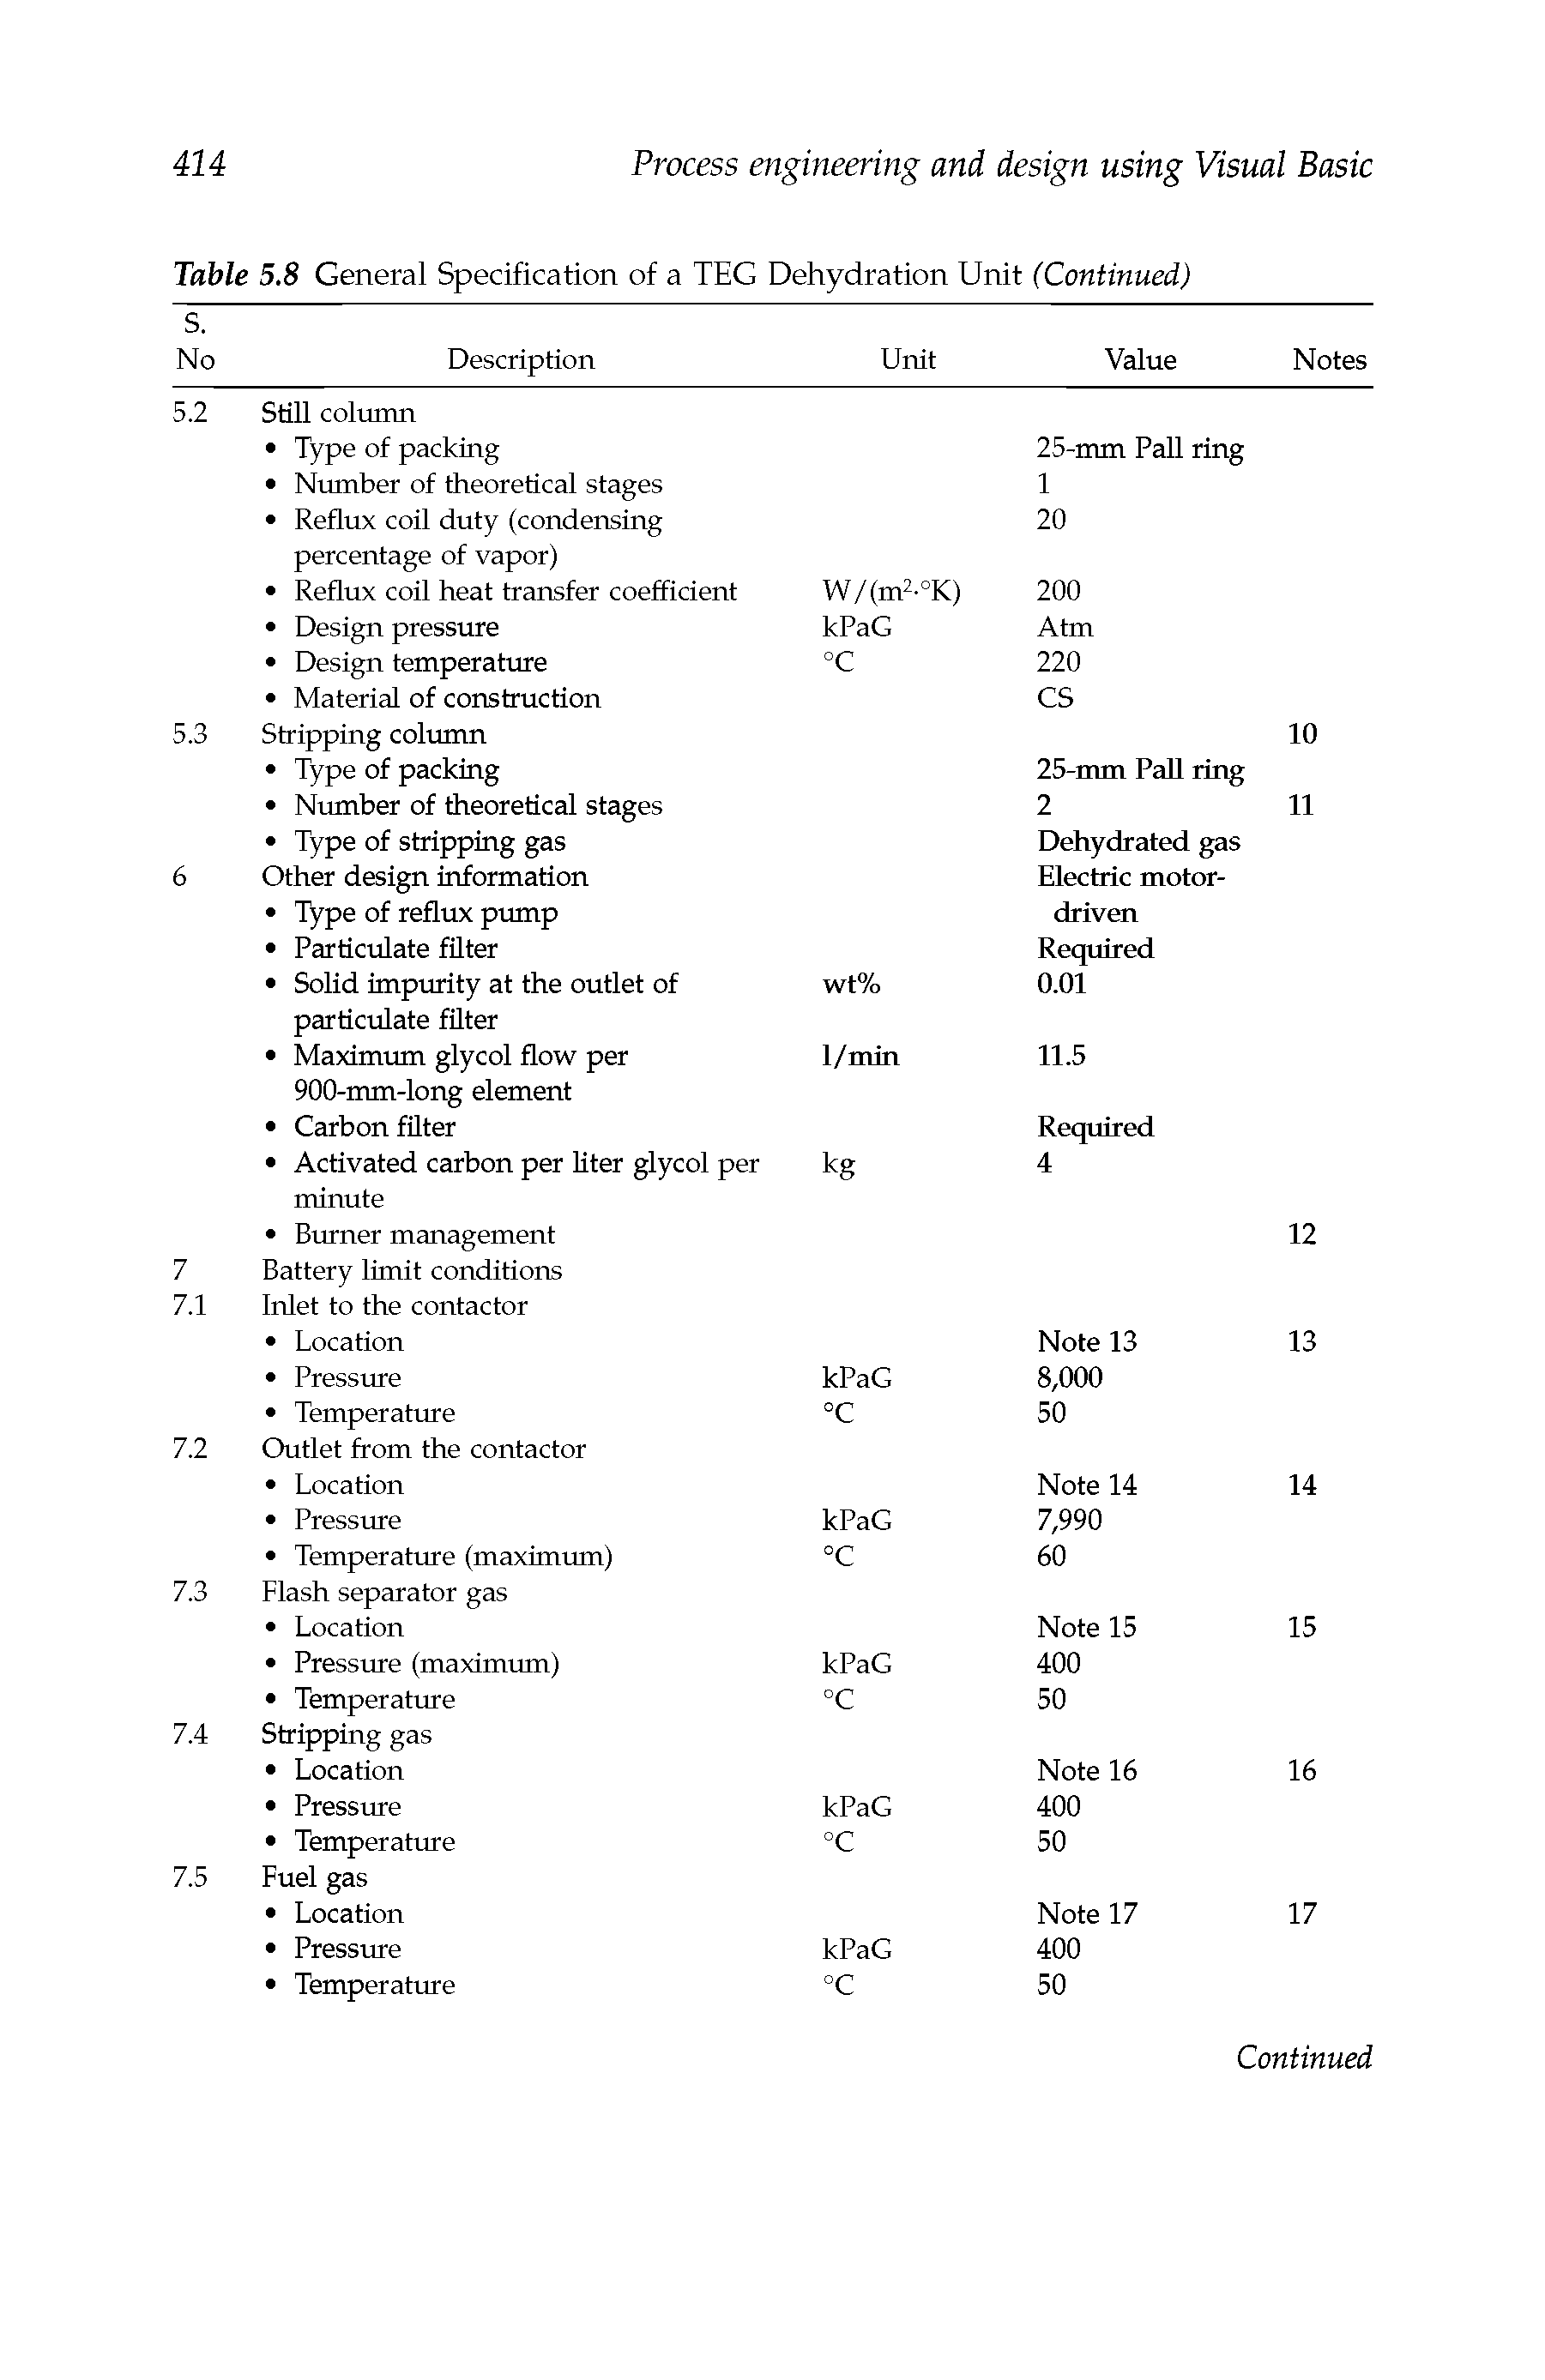 Table 5.8 General Specification of a TEG Dehydration Unit (Continued) S.